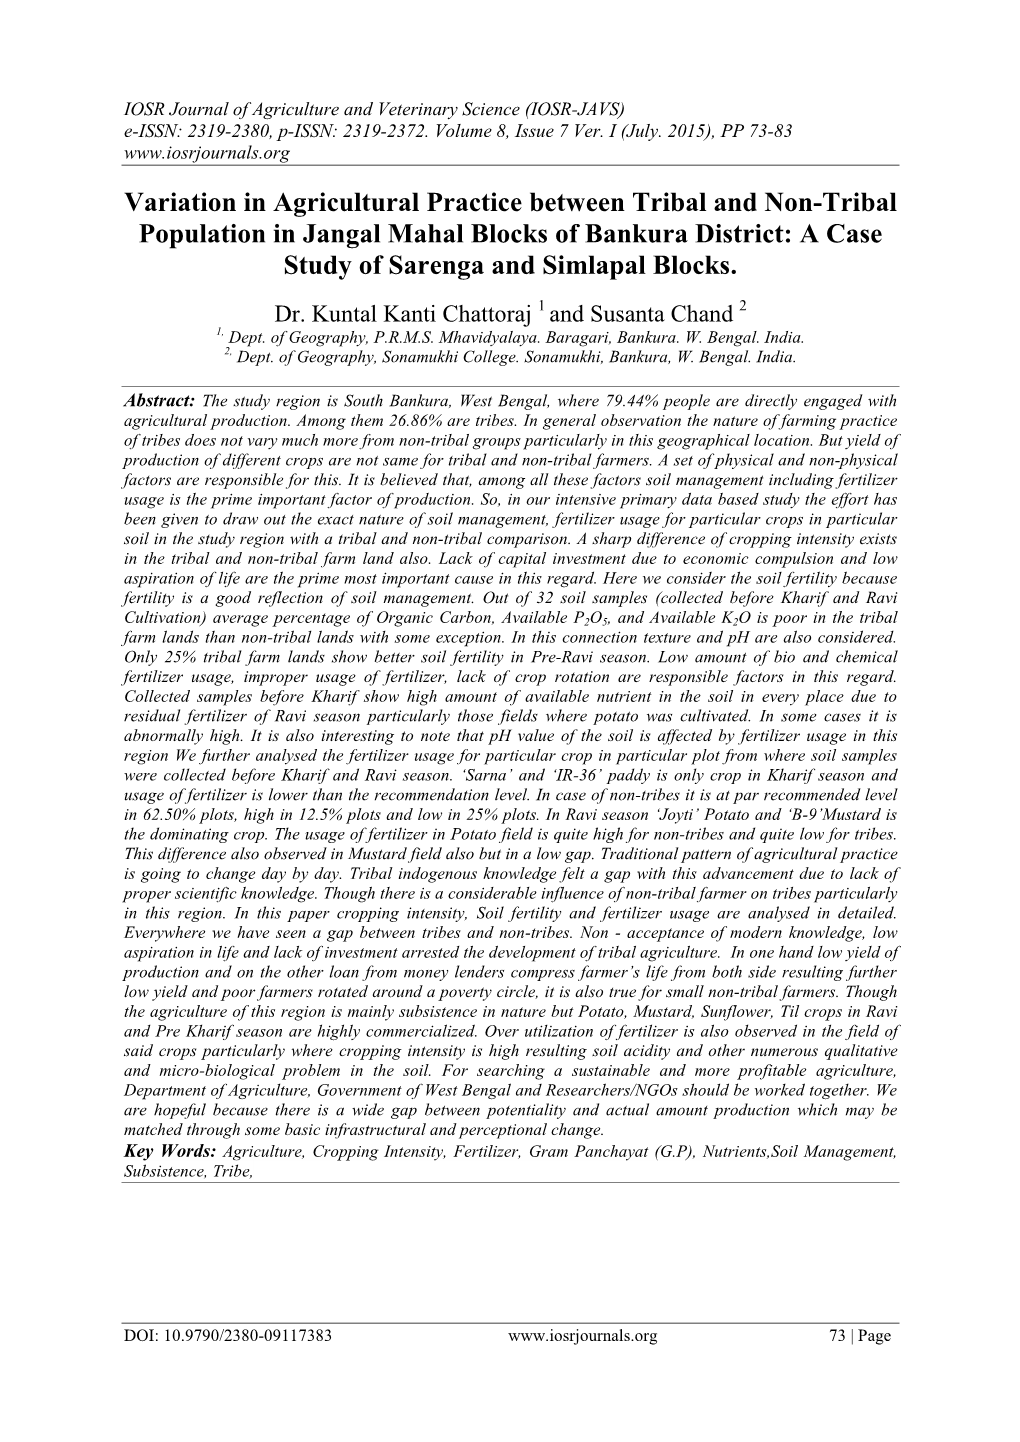 Variation in Agricultural Practice Between Tribal and Non-Tribal Population in Jangal Mahal Blocks of Bankura District: a Case Study of Sarenga and Simlapal Blocks